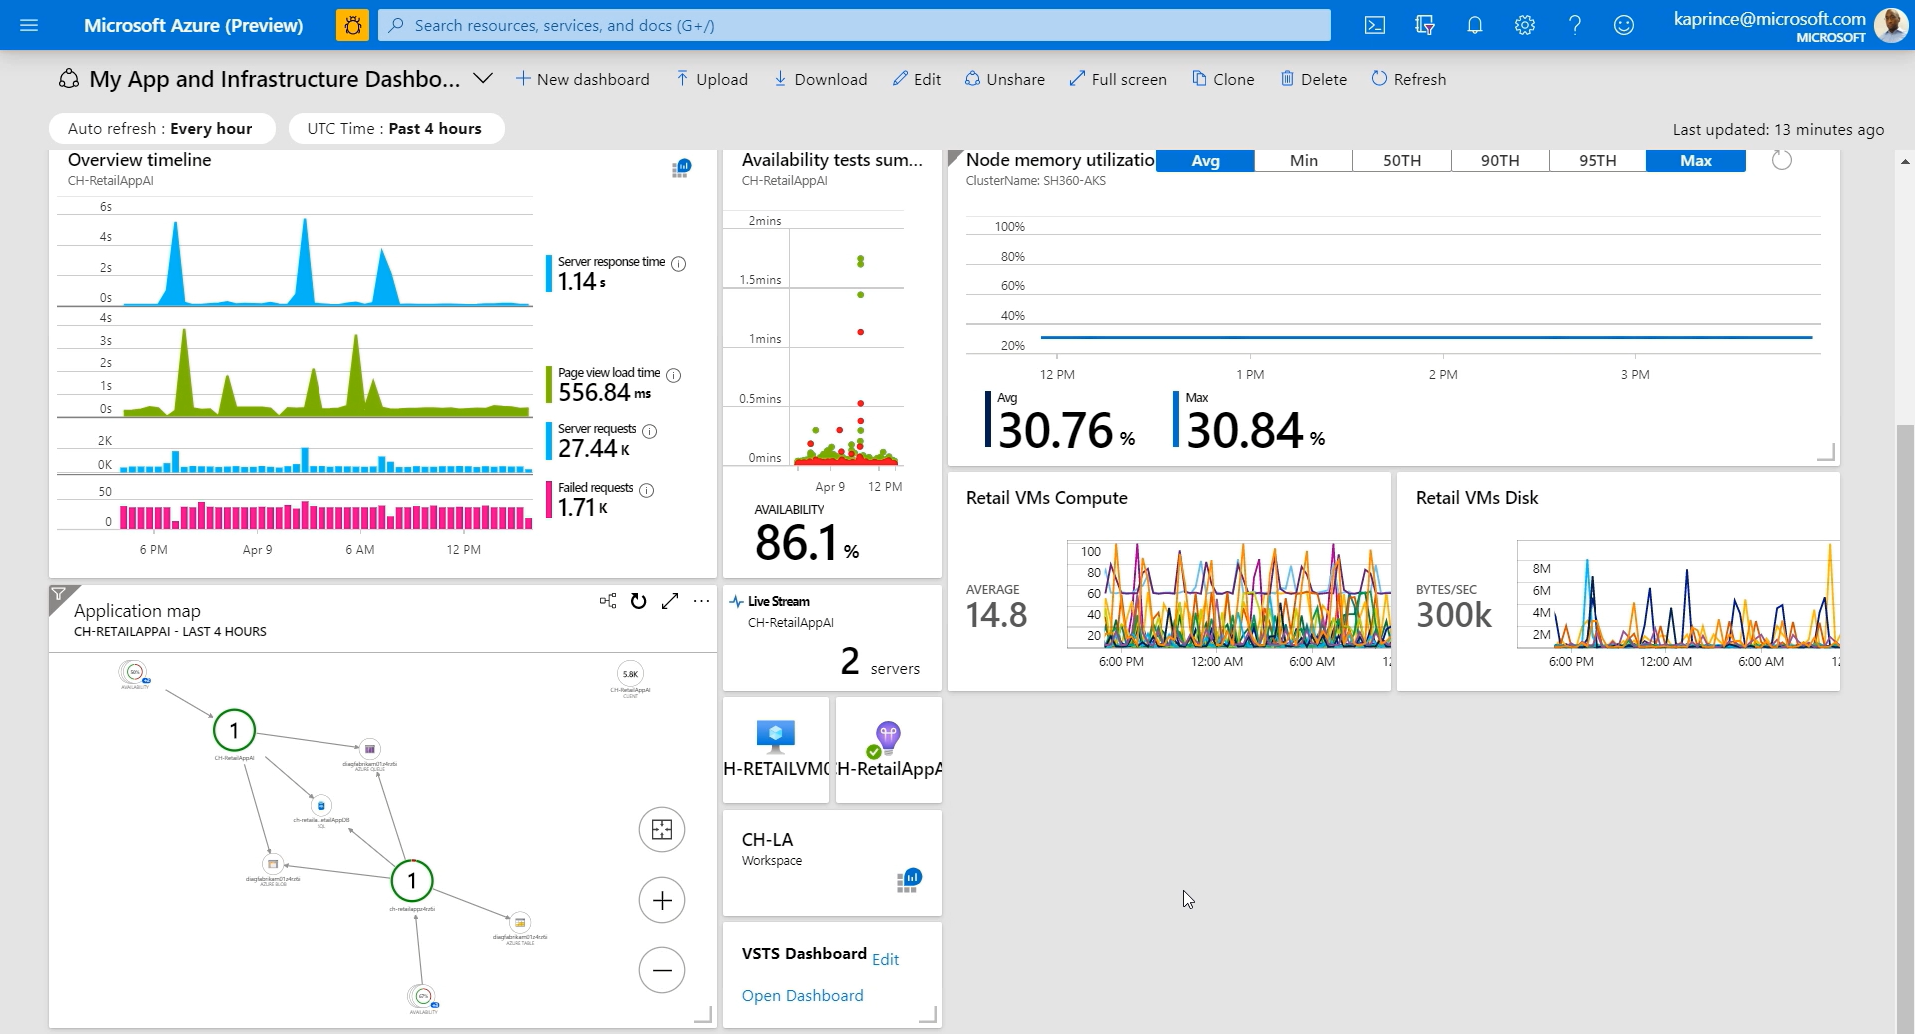 Screenshot that shows an example of an Azure dashboard with customizable information.